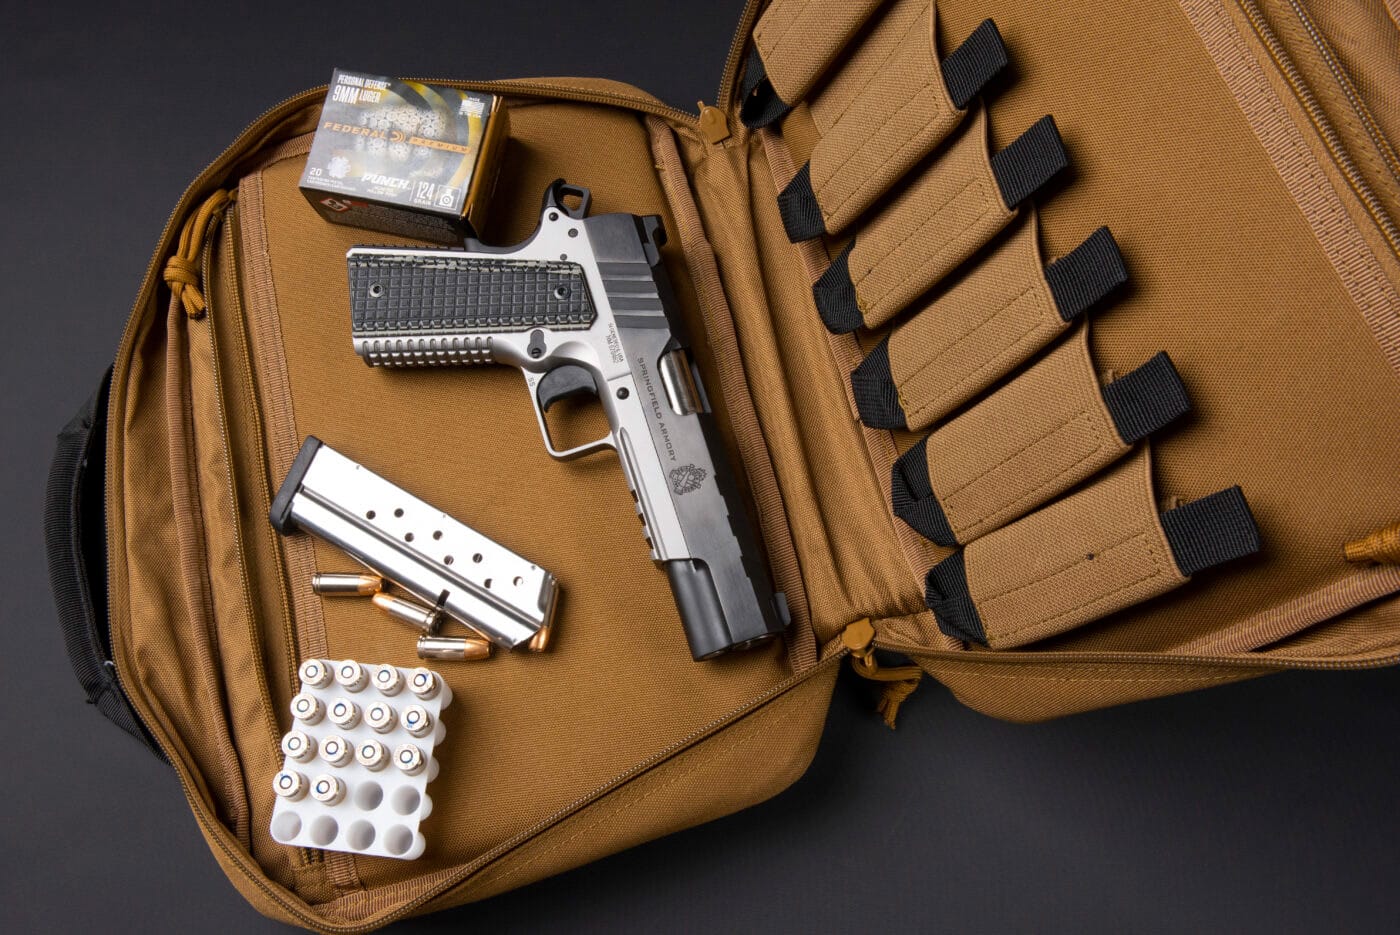 Springfield Armory Emissary pistol in carrying case with ammo and magazine